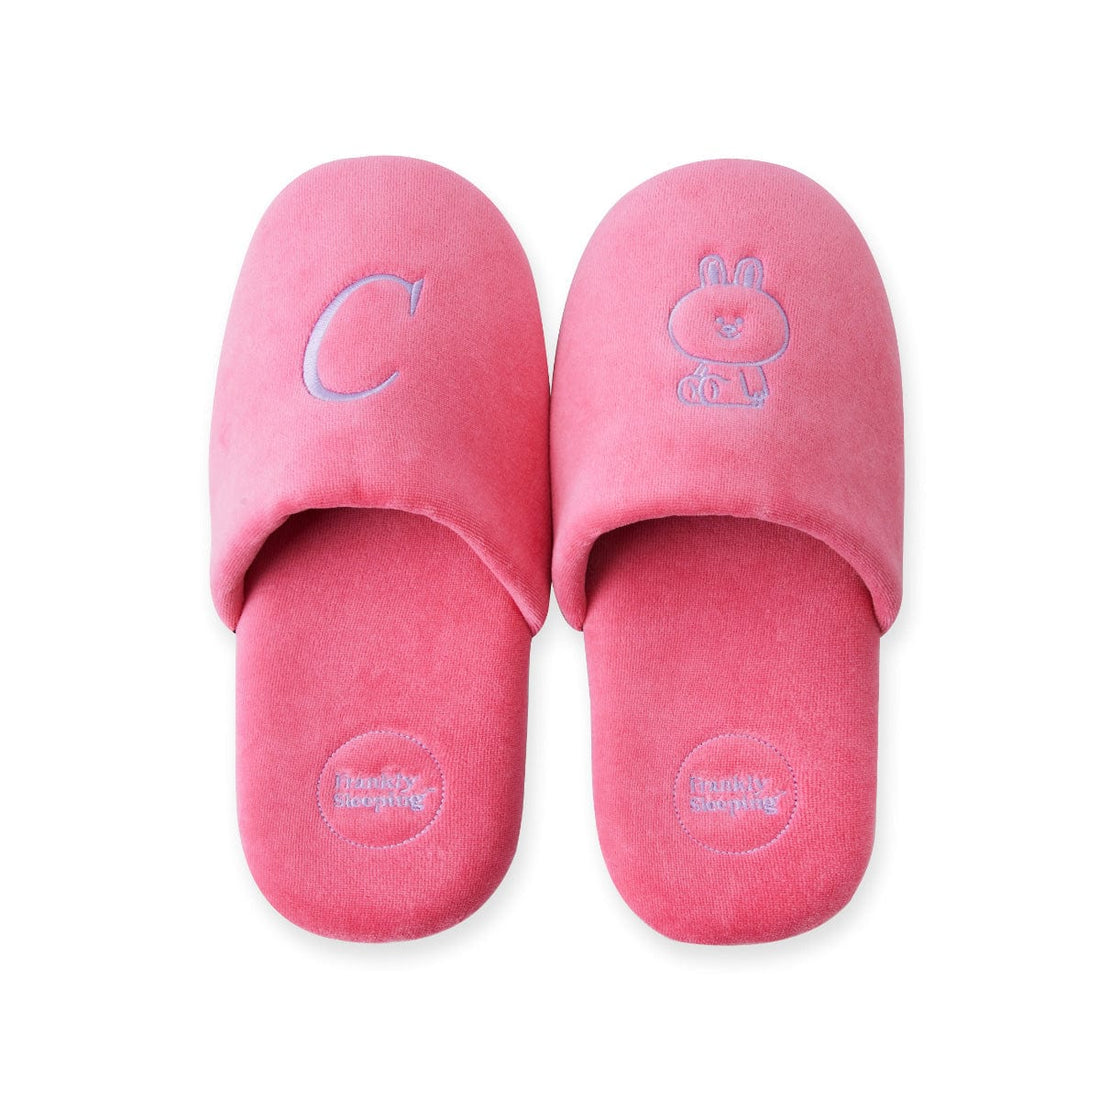 LINE FRIENDS FASHION CONY LINE FRIENDS FRANKLY SLEEPING CONY HOUSE SLIPPERS